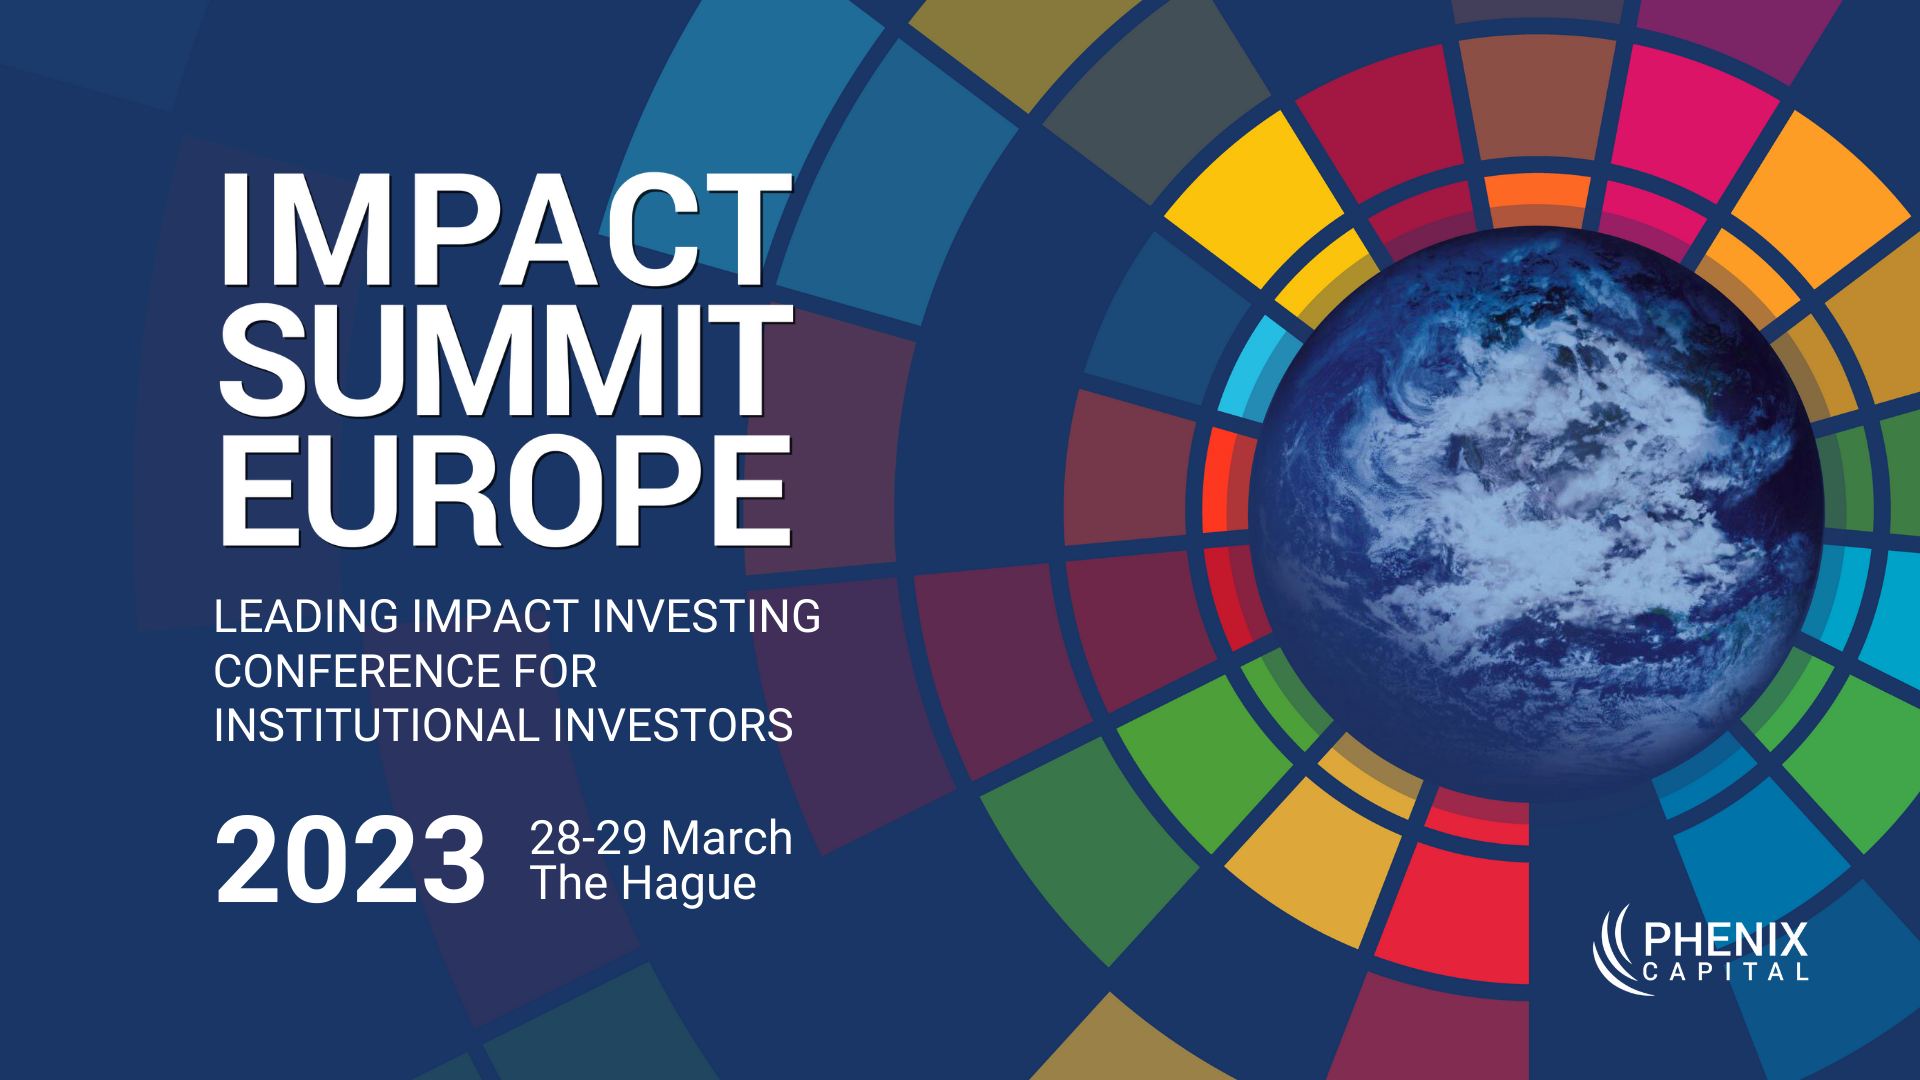 IMPACT SUMMIT EUROPE 2023 Leading impact investing conference for